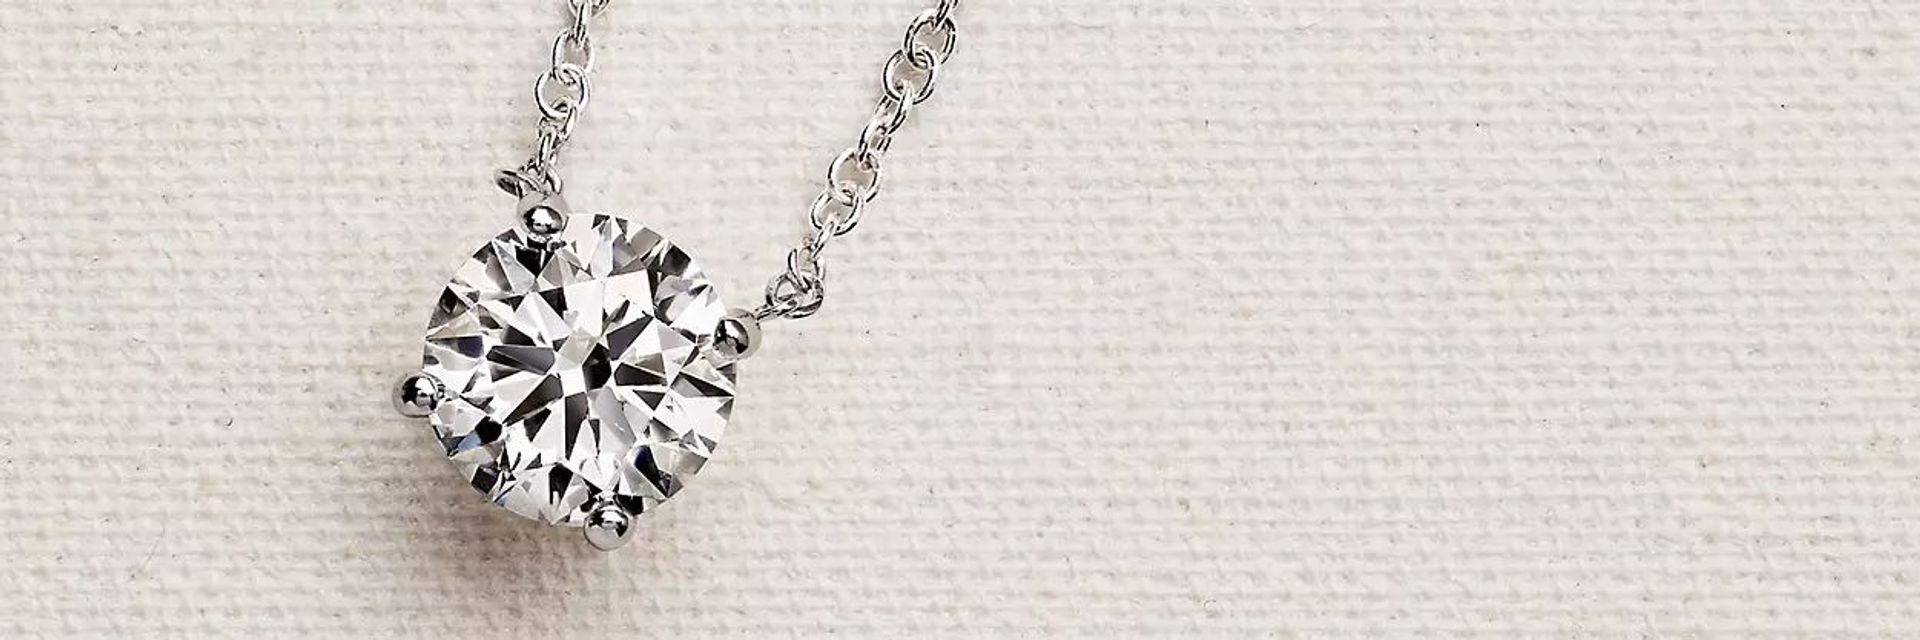 Best Diamond Heart Necklaces to Celebrate Your Anniversary